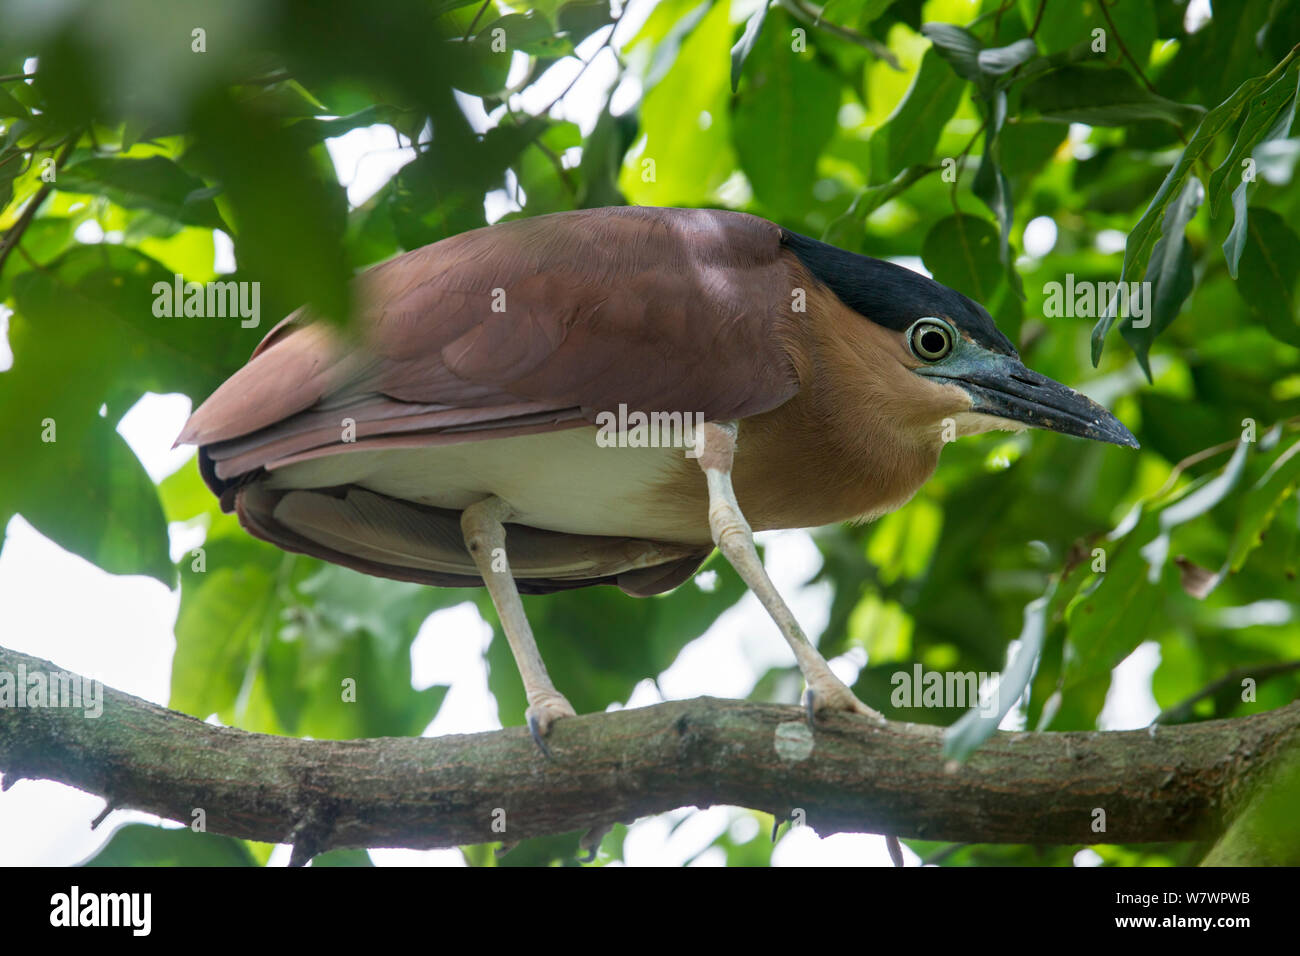 Adult Nankeen night-heron (Nycticorax caledonicus australasiae) perched in a tree amongst leaves. Labuan Bird Park, Sabah, Borneo. April. Captive. Stock Photo